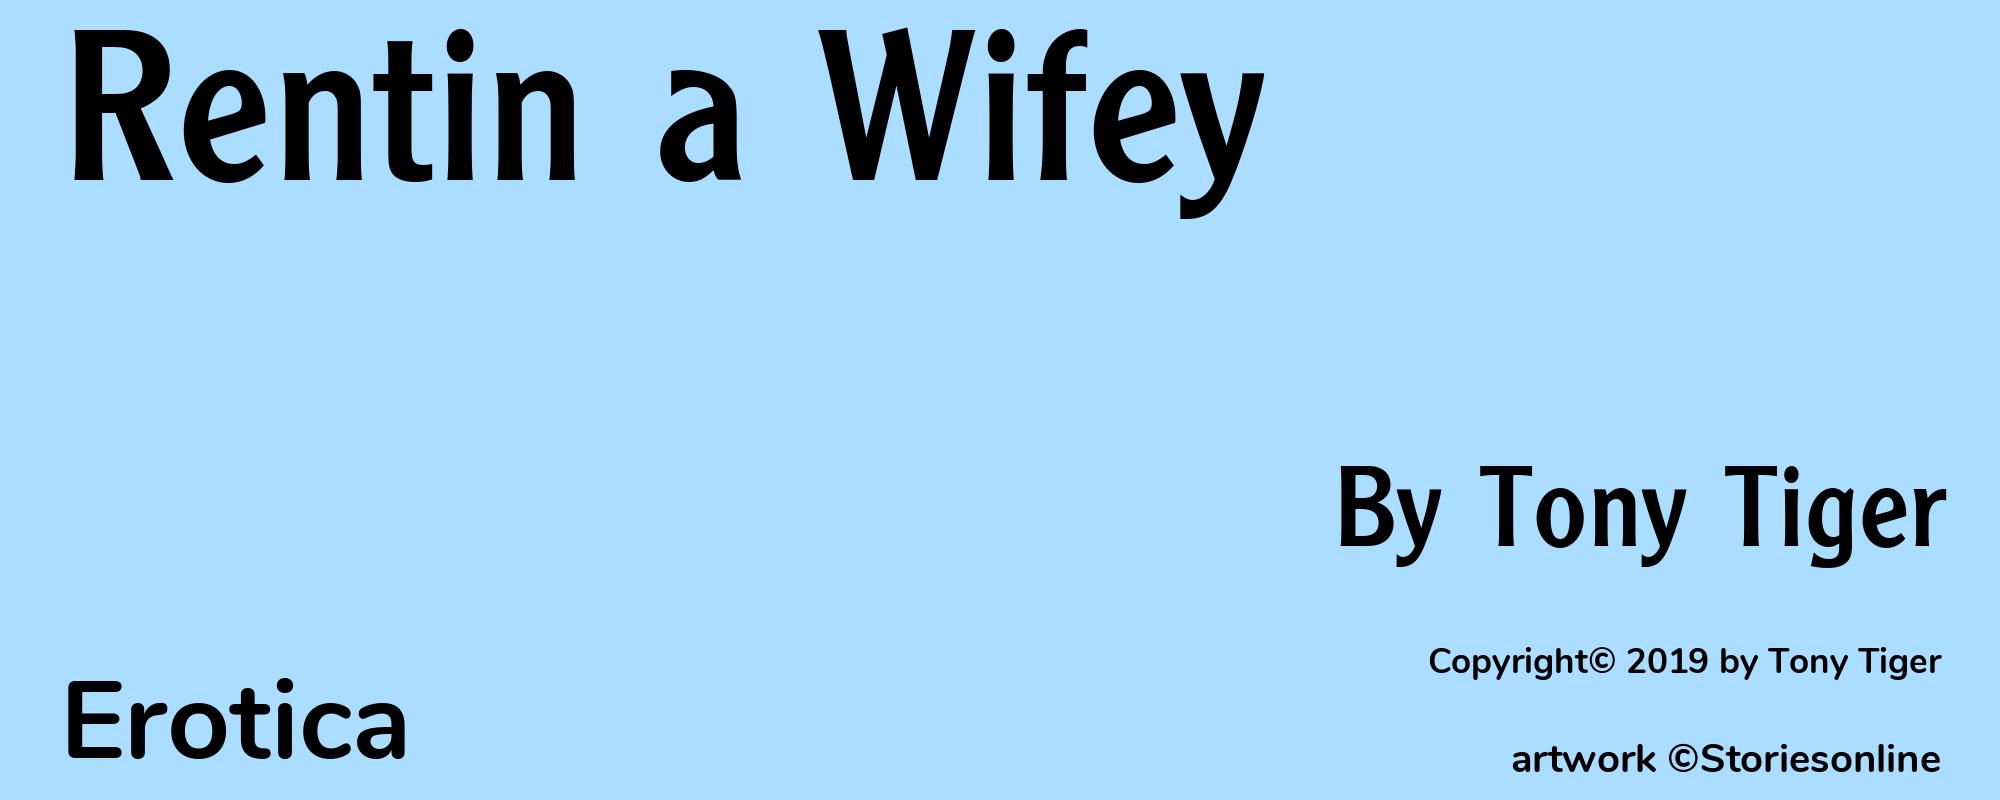 Rentin a Wifey - Cover